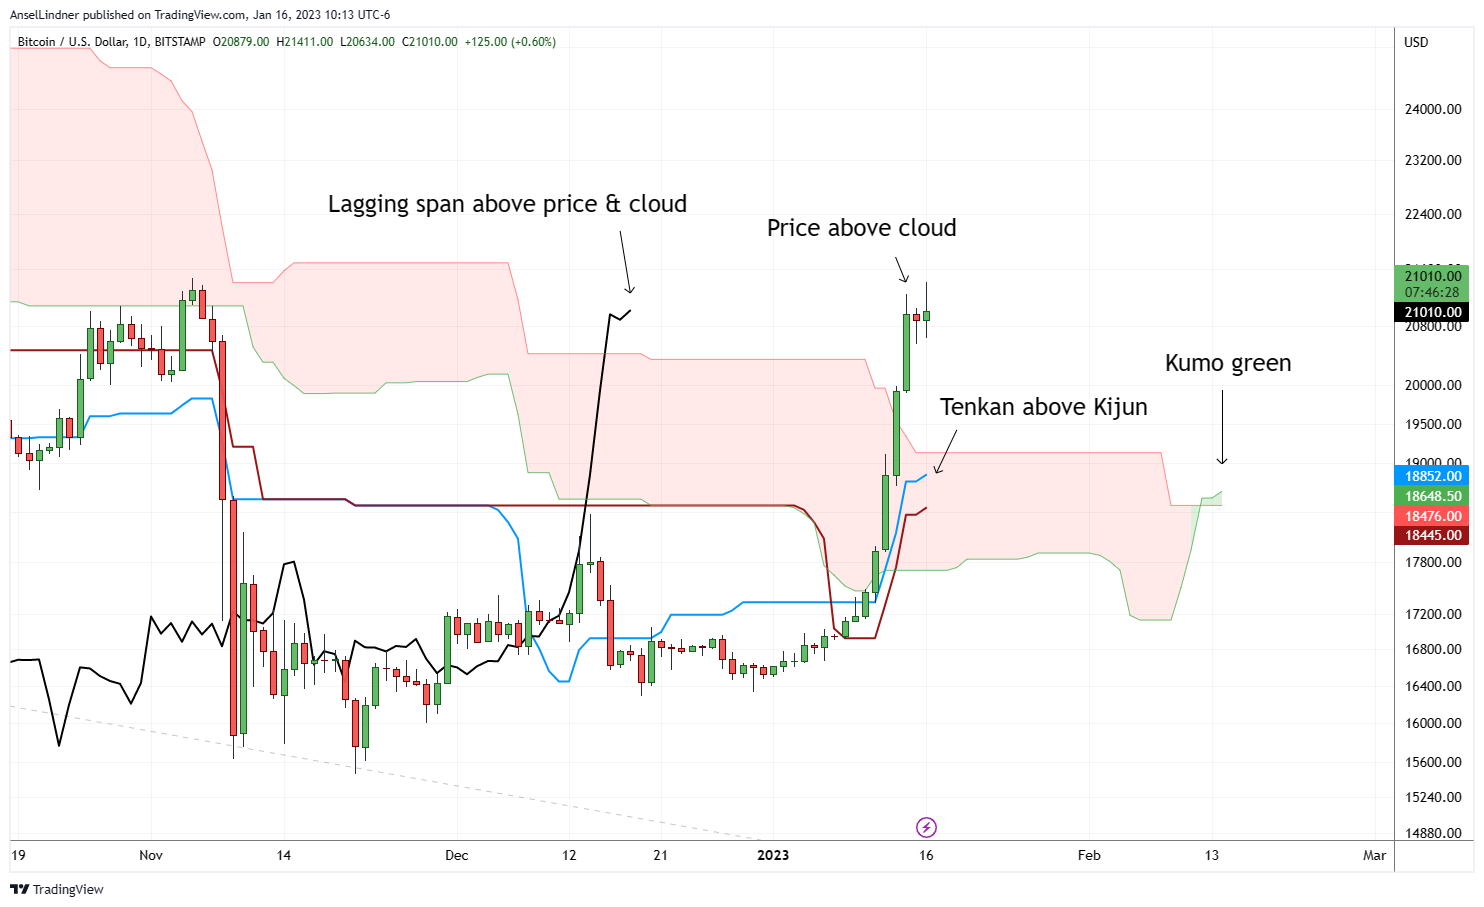 Bitcoin daily chart with Ichimoku cloud on extended settings